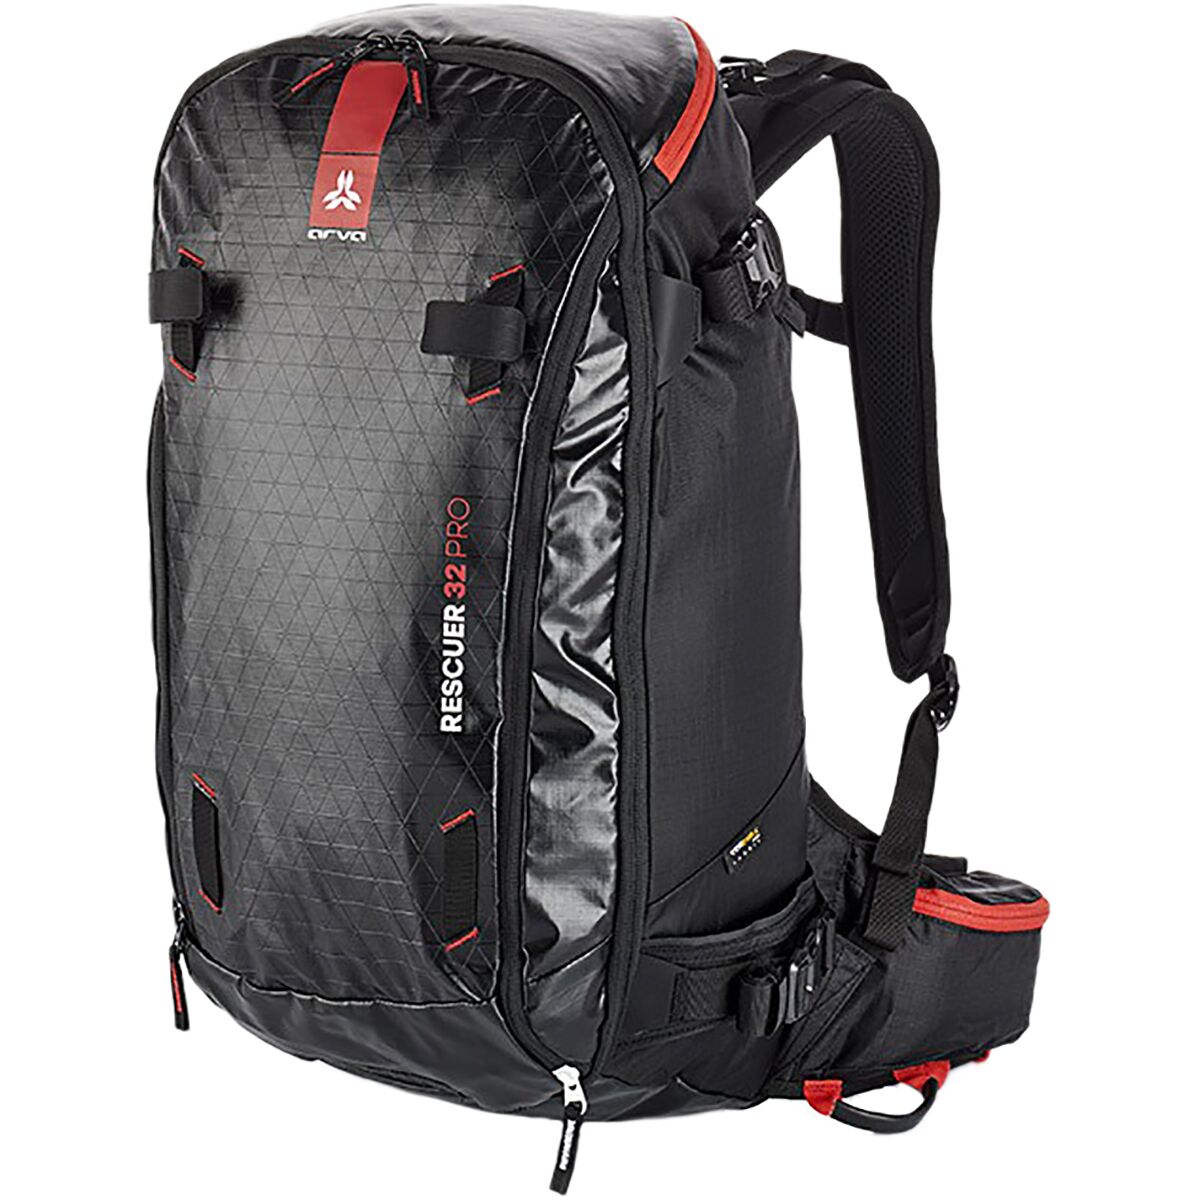 ARVA Rescuer Pro 32L Backpack